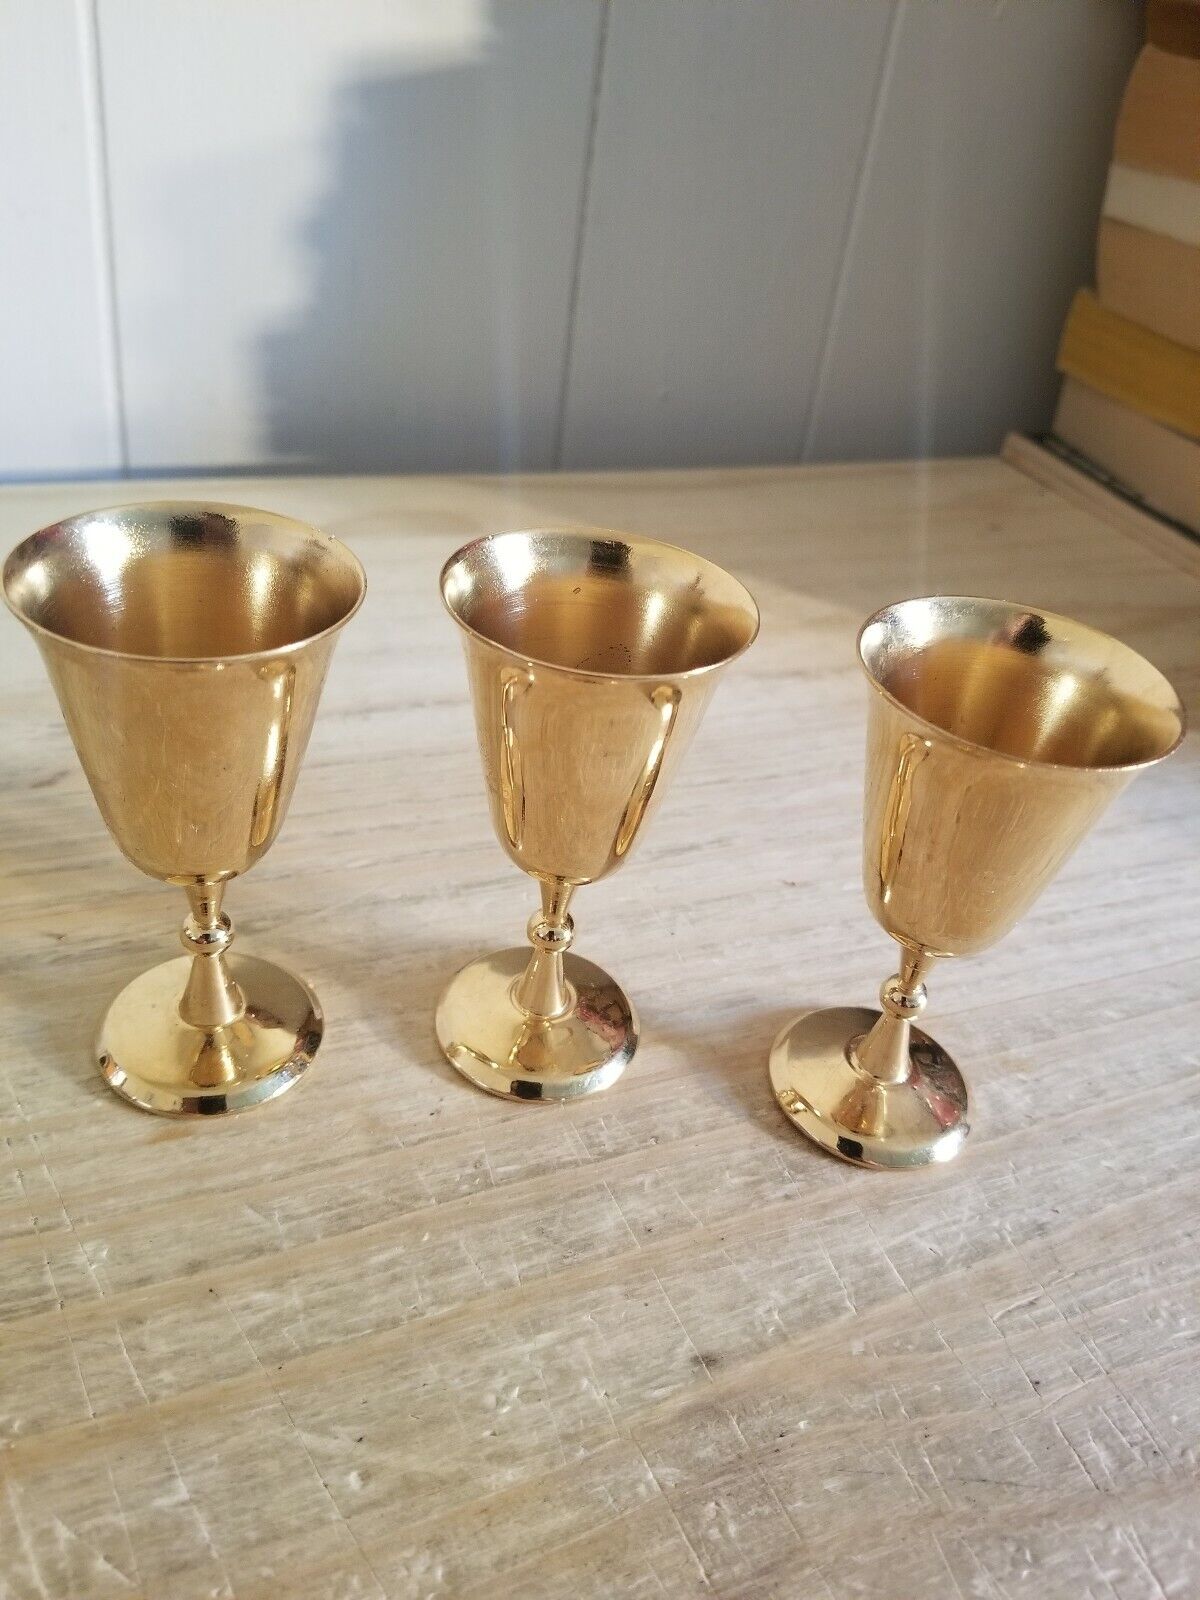 THREE BEAUTIFUL ALMOST 3 1/2 INCH TALL GOLD PLATED DRINKING COBLETS.NO MARKINGS.